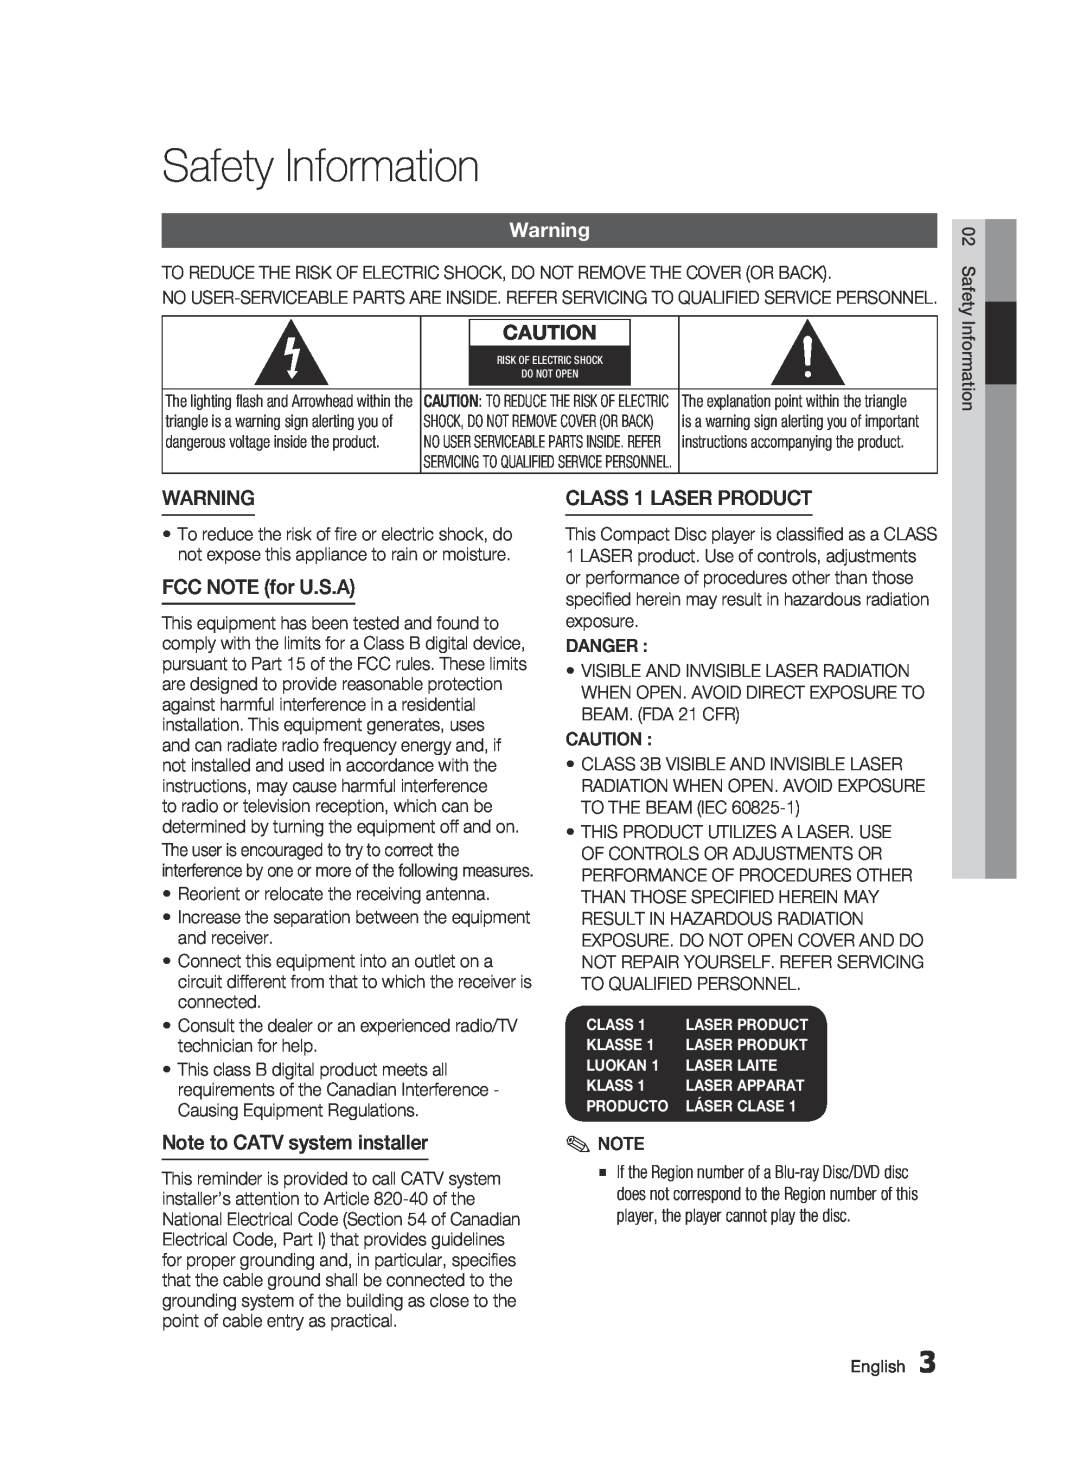 Samsung 01942G-BD-C6300-XAC-0823 user manual Safety Information, FCC NOTE for U.S.A, Note to CATV system installer 